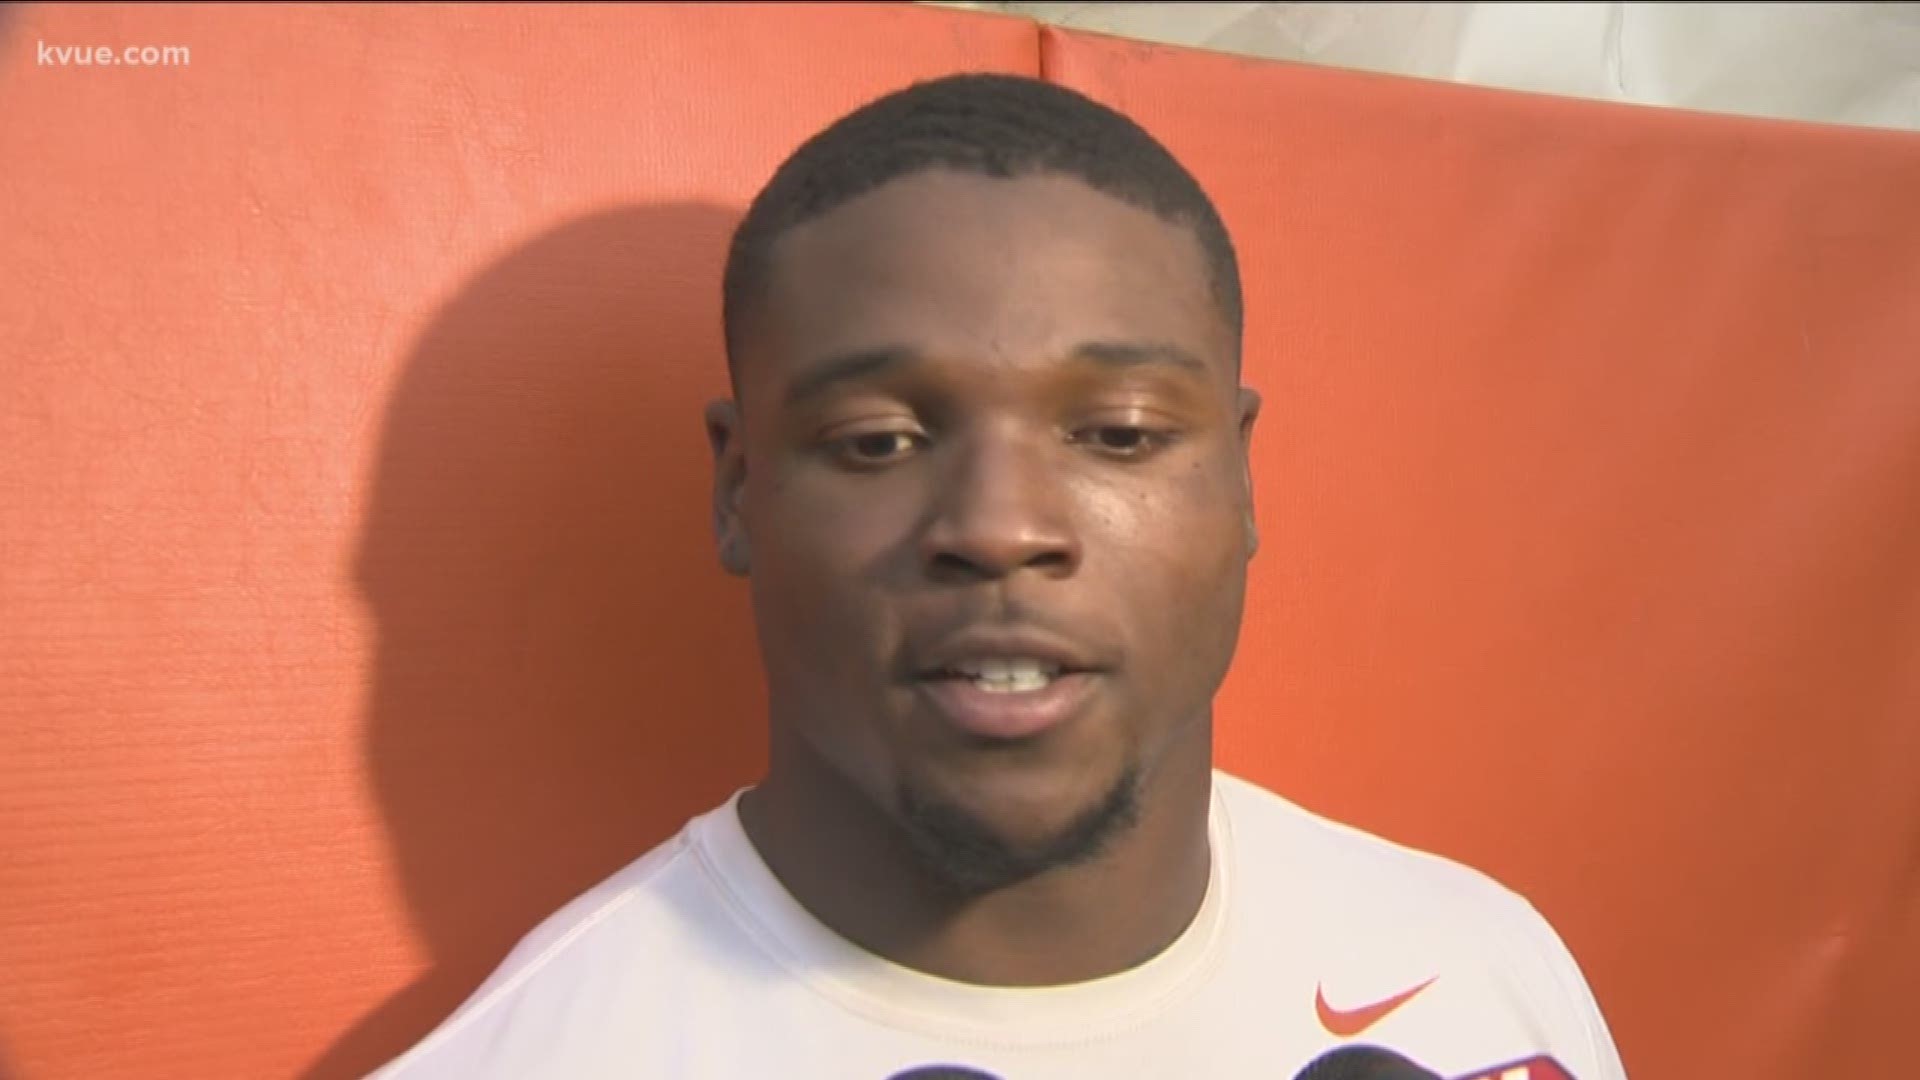 UT defensive back Chris Brown reassured that the team is ready to take on its "next man up" mentality following news of the multiple injuries in the secondary.